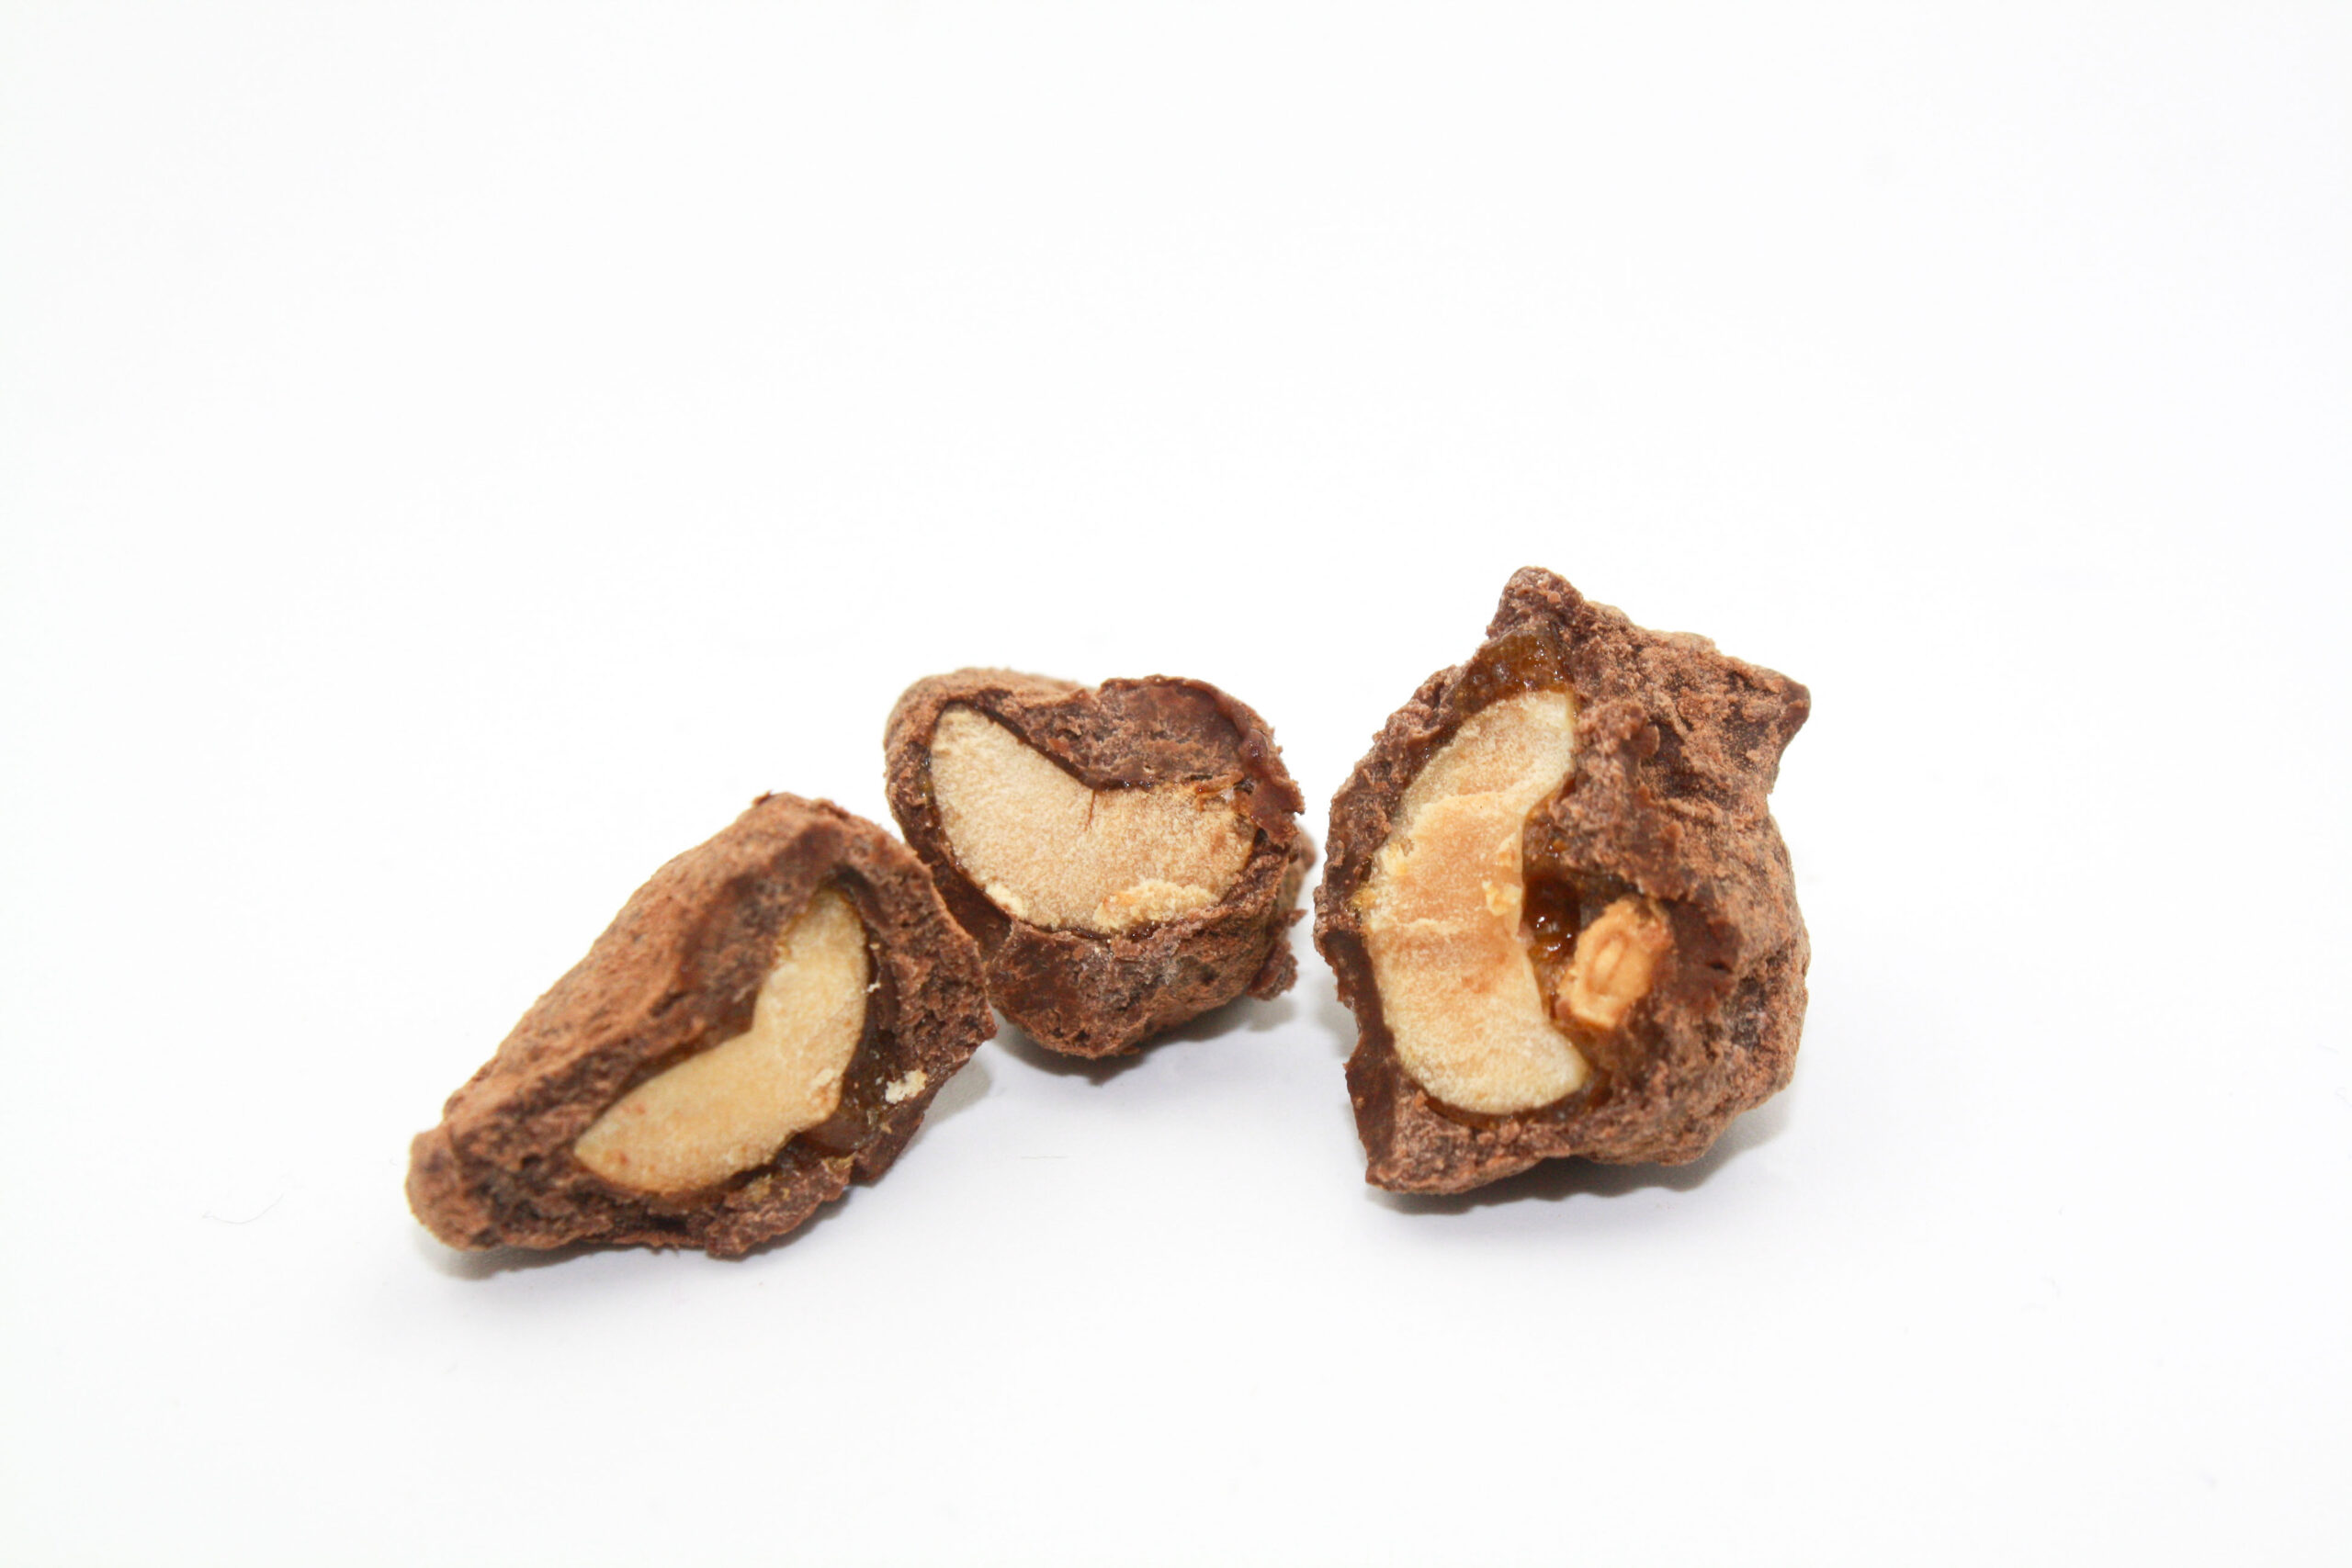 cross section view of the Dragée Peanuts showing the layers of peanut, caramel and chocolate